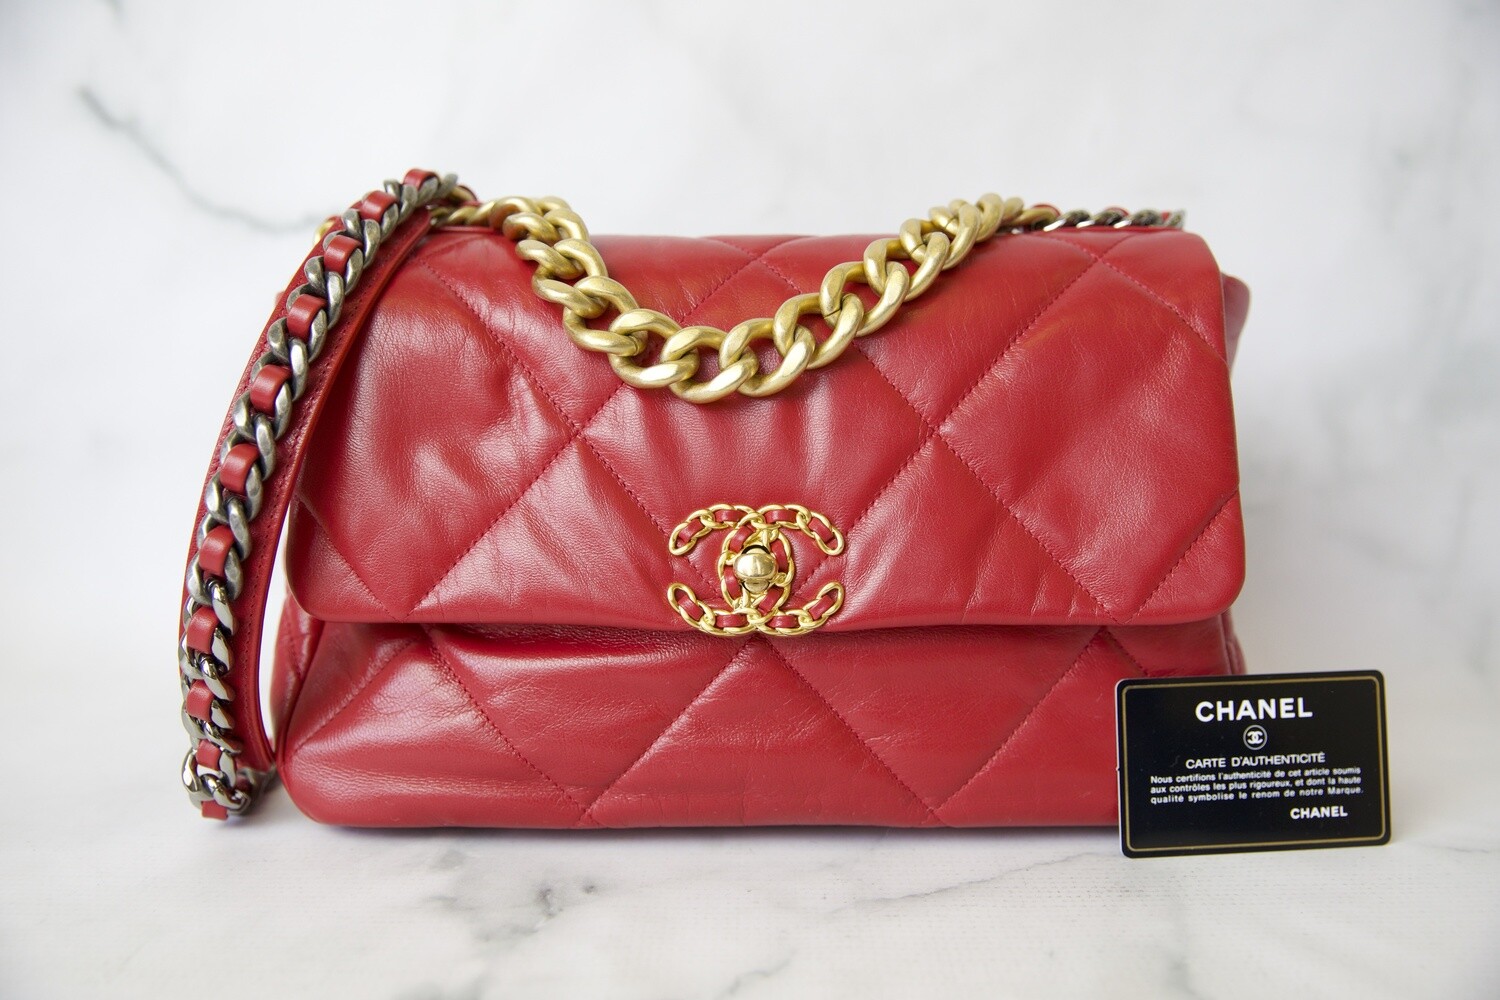 Chanel 19 Large, Red Goatskin, Preowned in Dustbag WA001